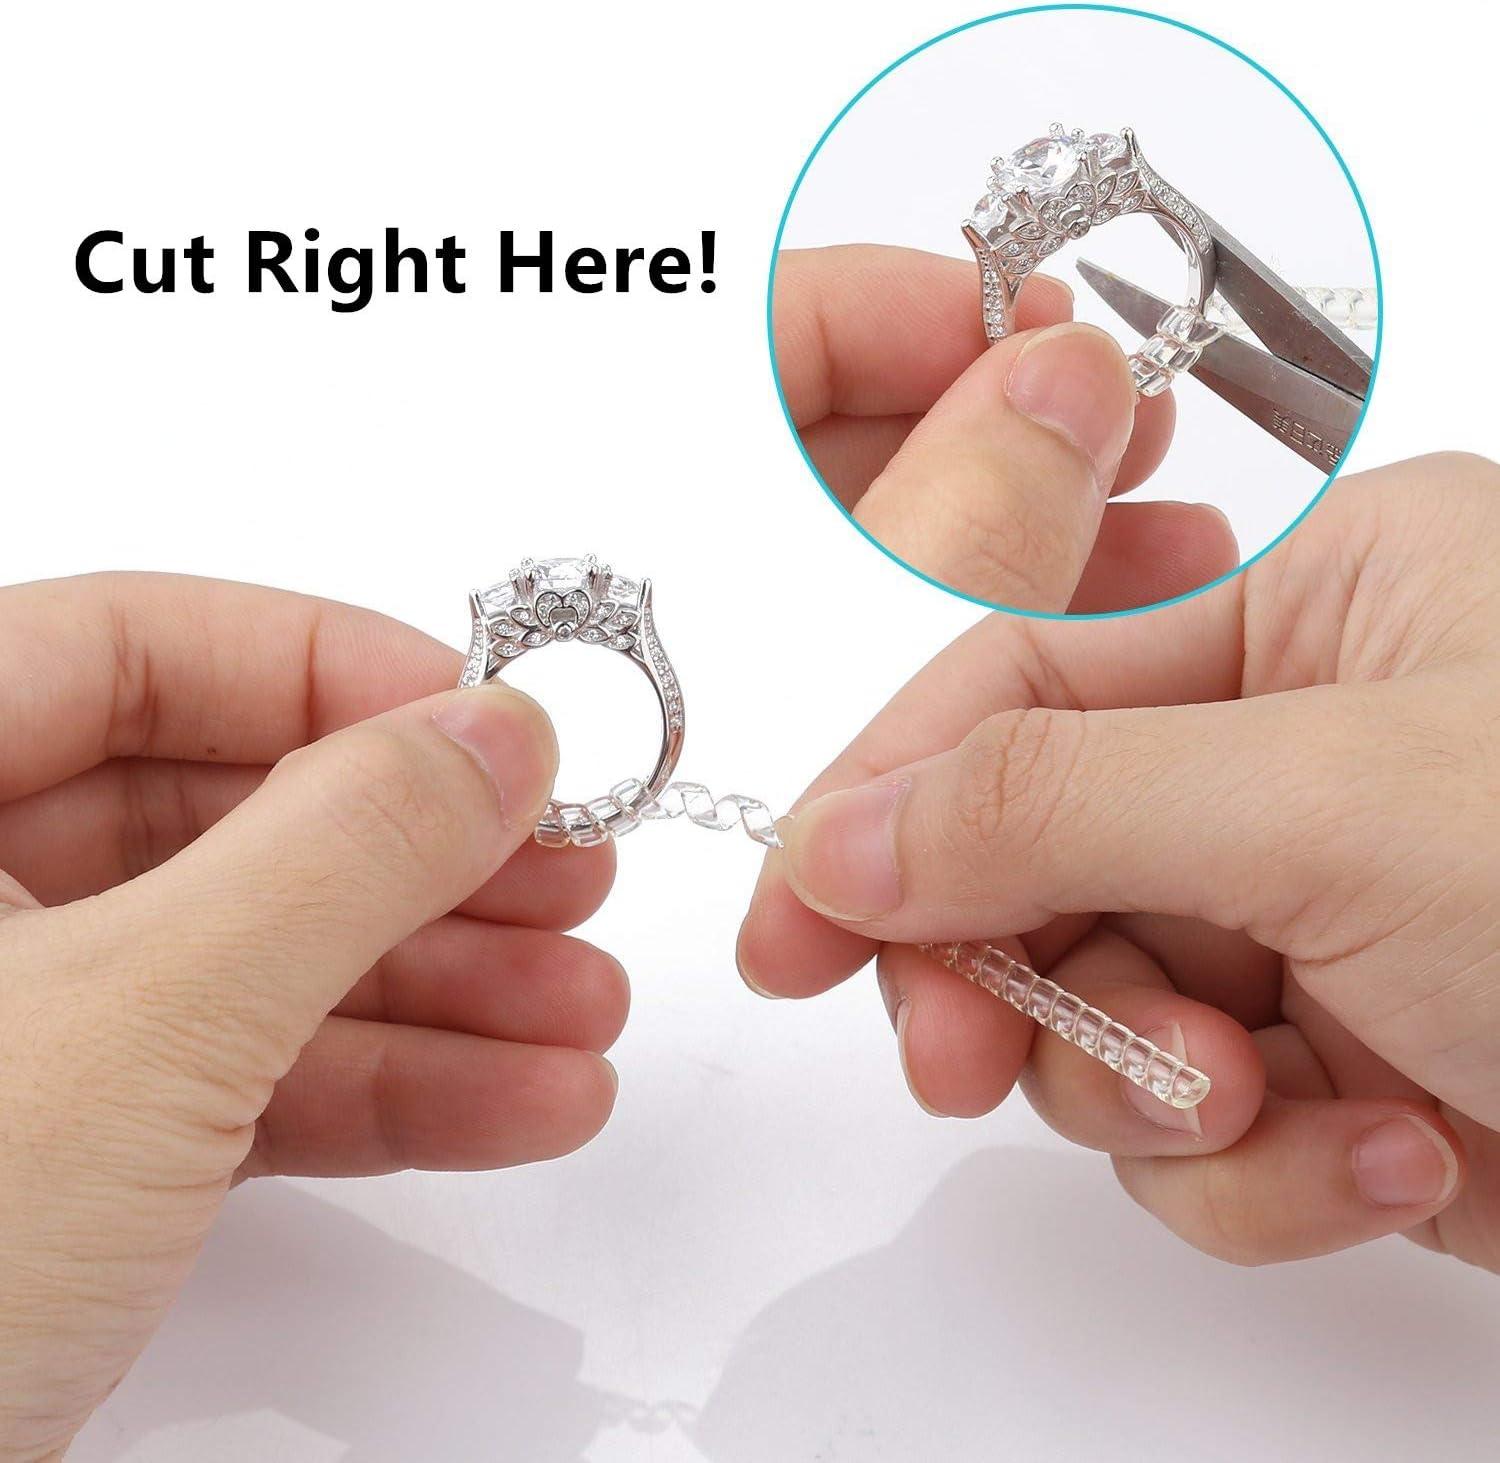  Ring Size Adjuster for Loose Rings Invisible Ring